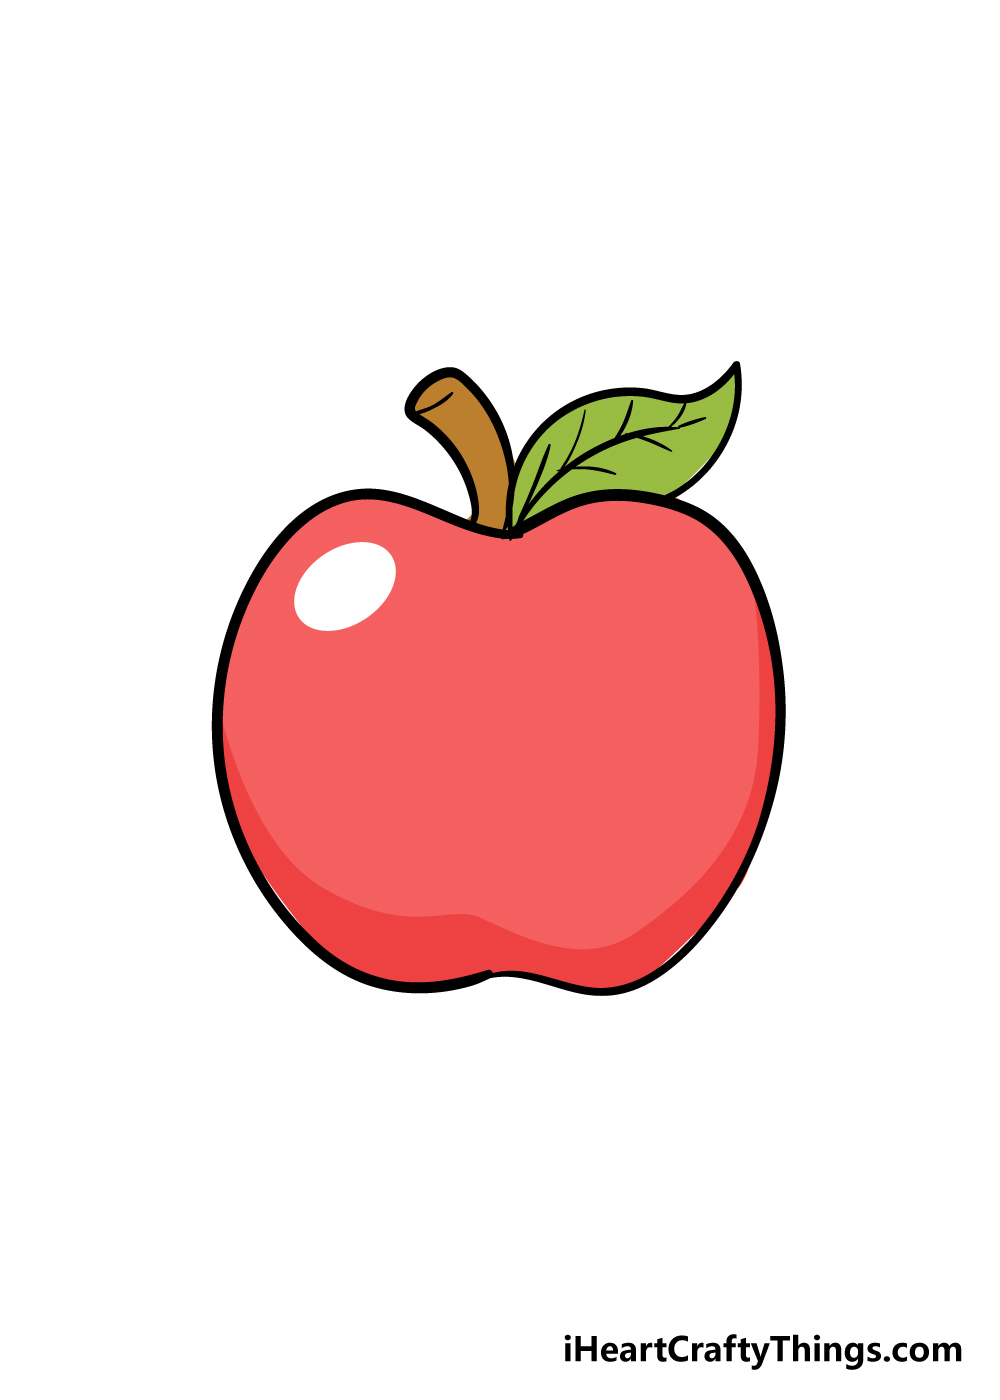 Apple Drawing - How To Draw An Apple Step By Step